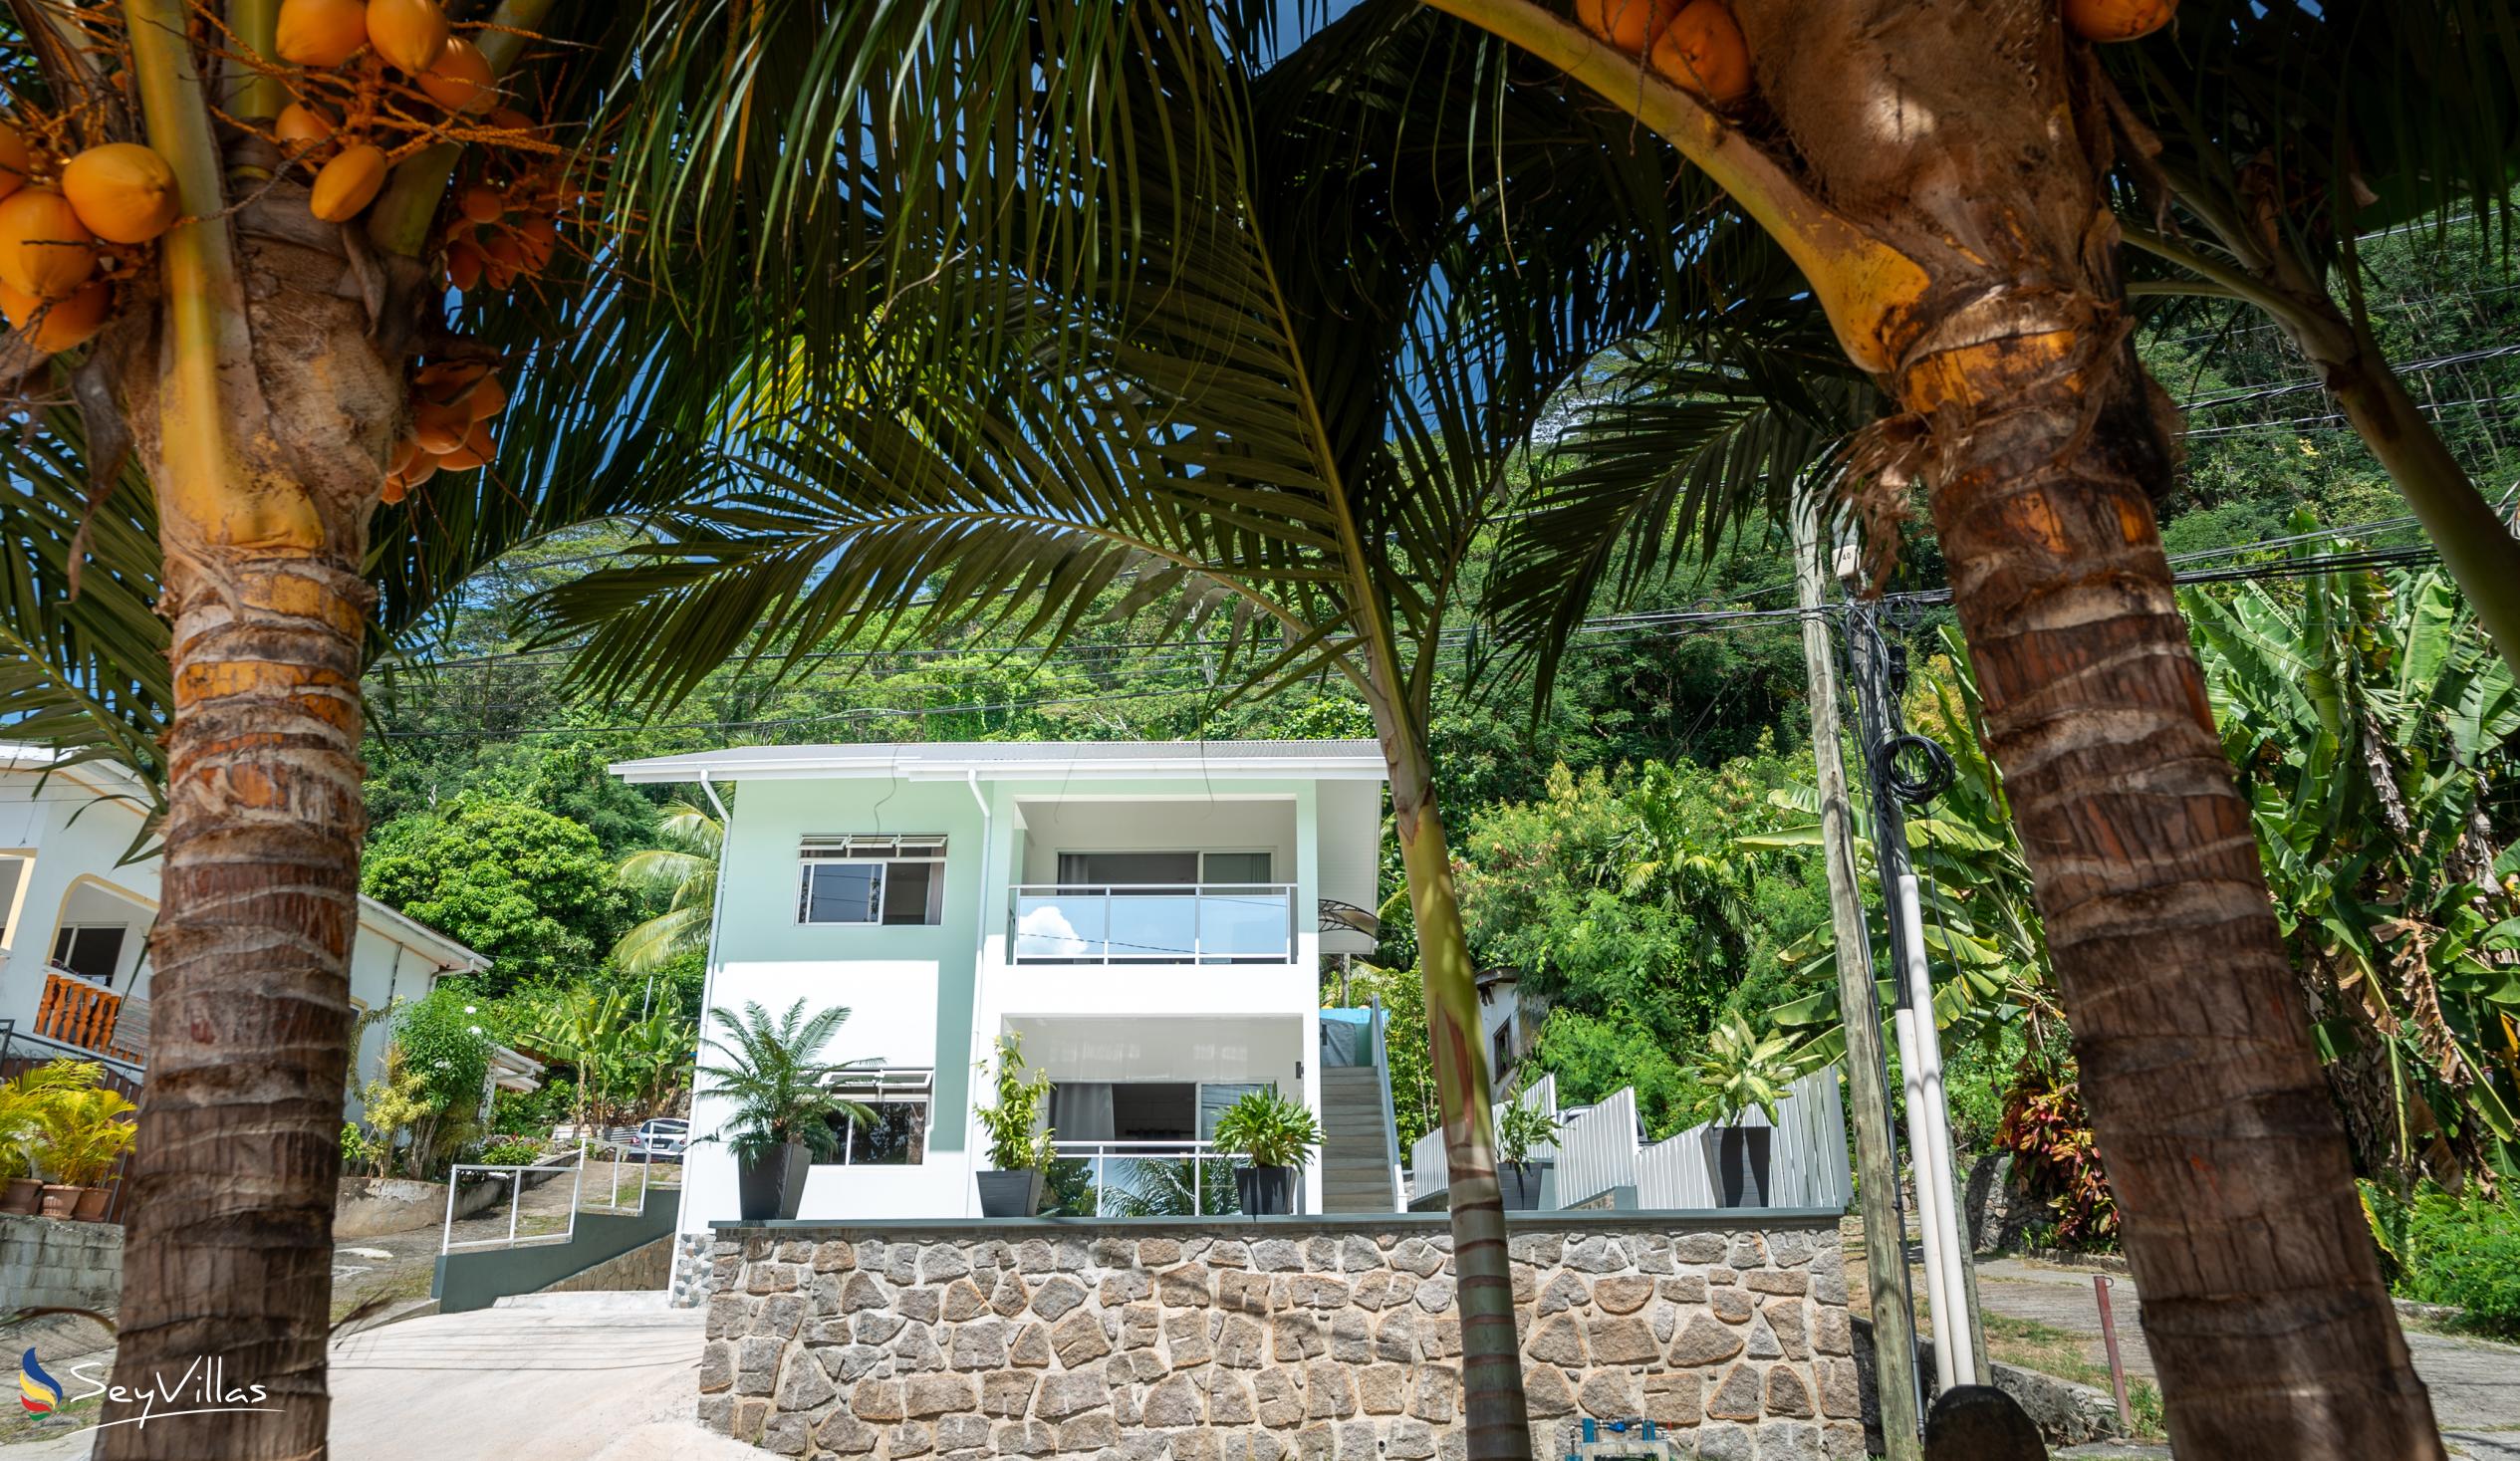 Photo 4: TES Self Catering - Outdoor area - Mahé (Seychelles)